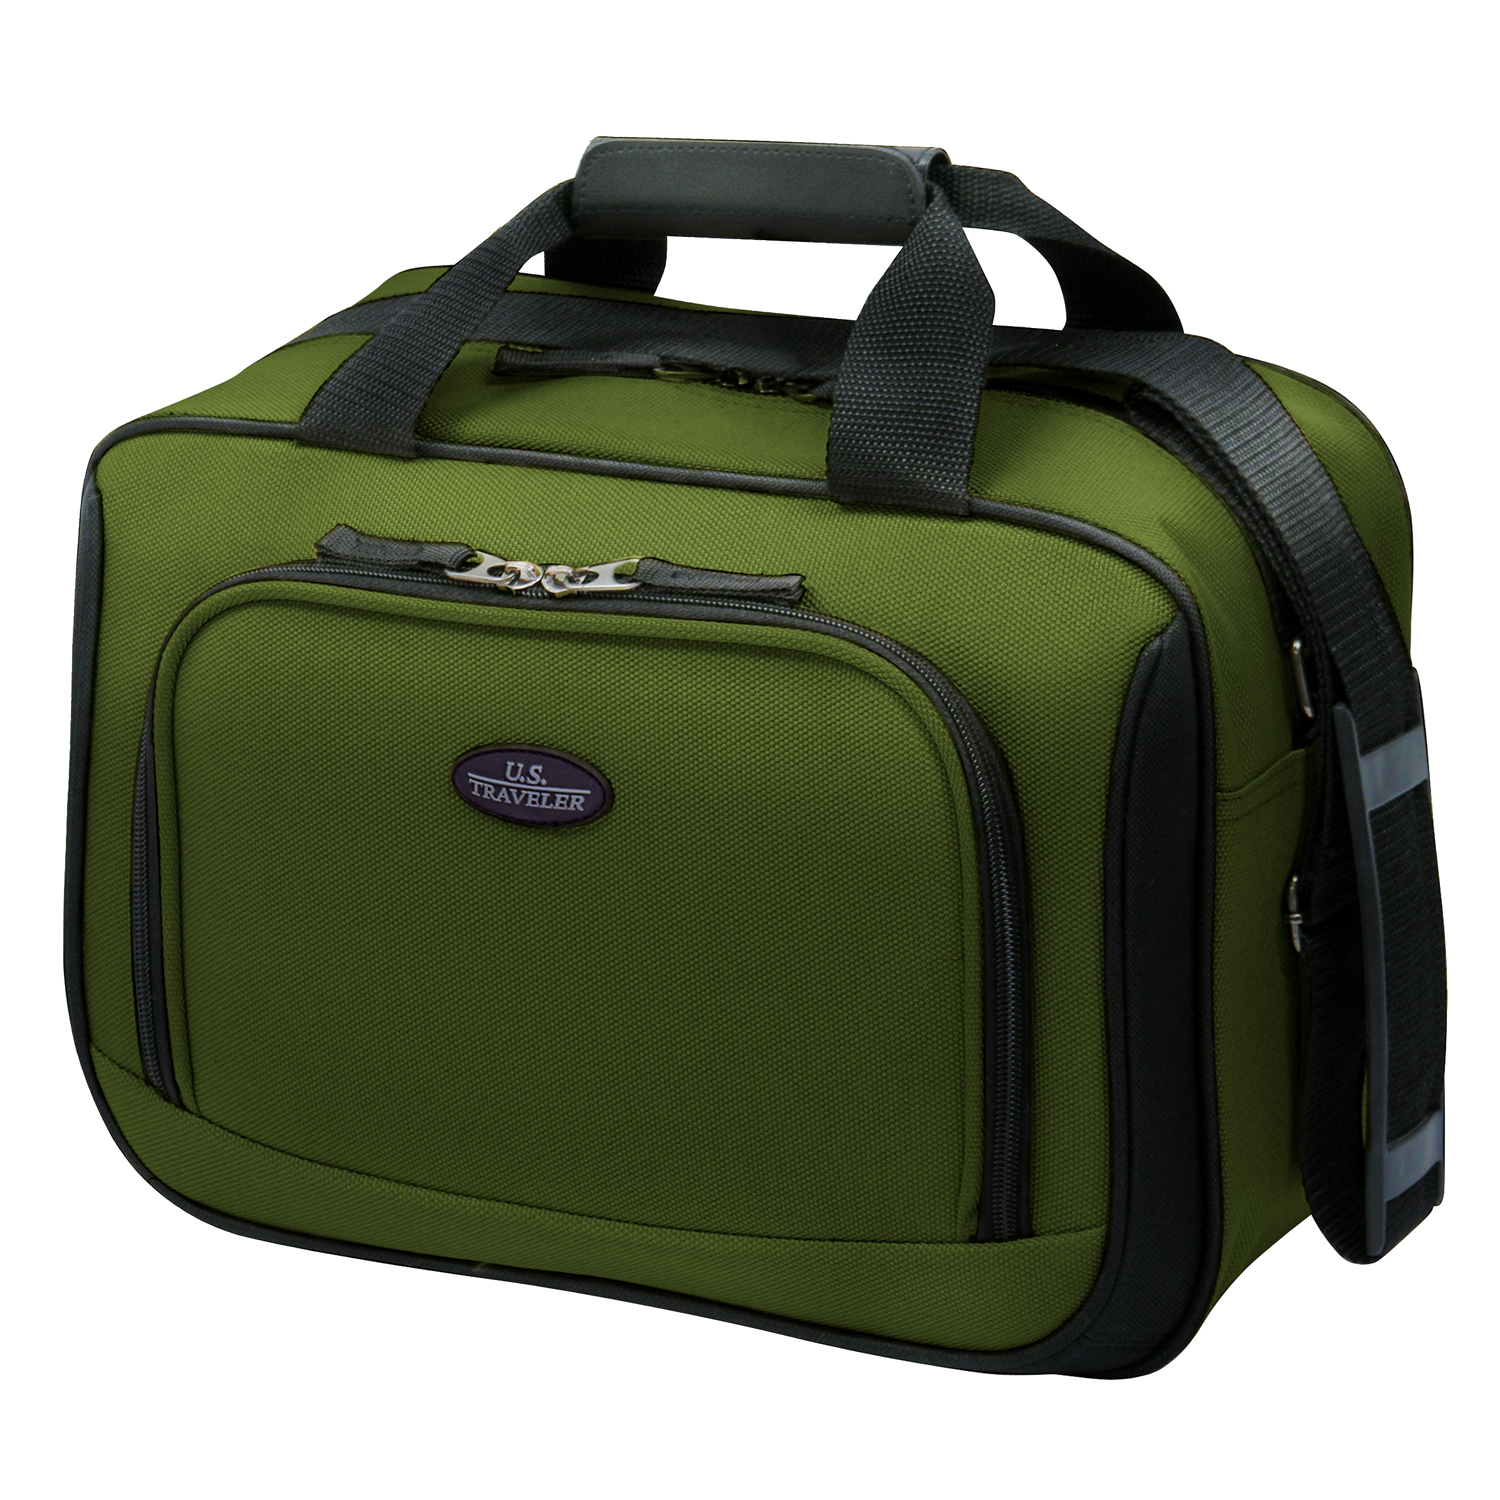 U.S. Traveler Rio Rugged Fabric Expandable Carry-on Luggage, 2 Wheel Rolling Suitcase, Green, 2-Piece - image 2 of 7